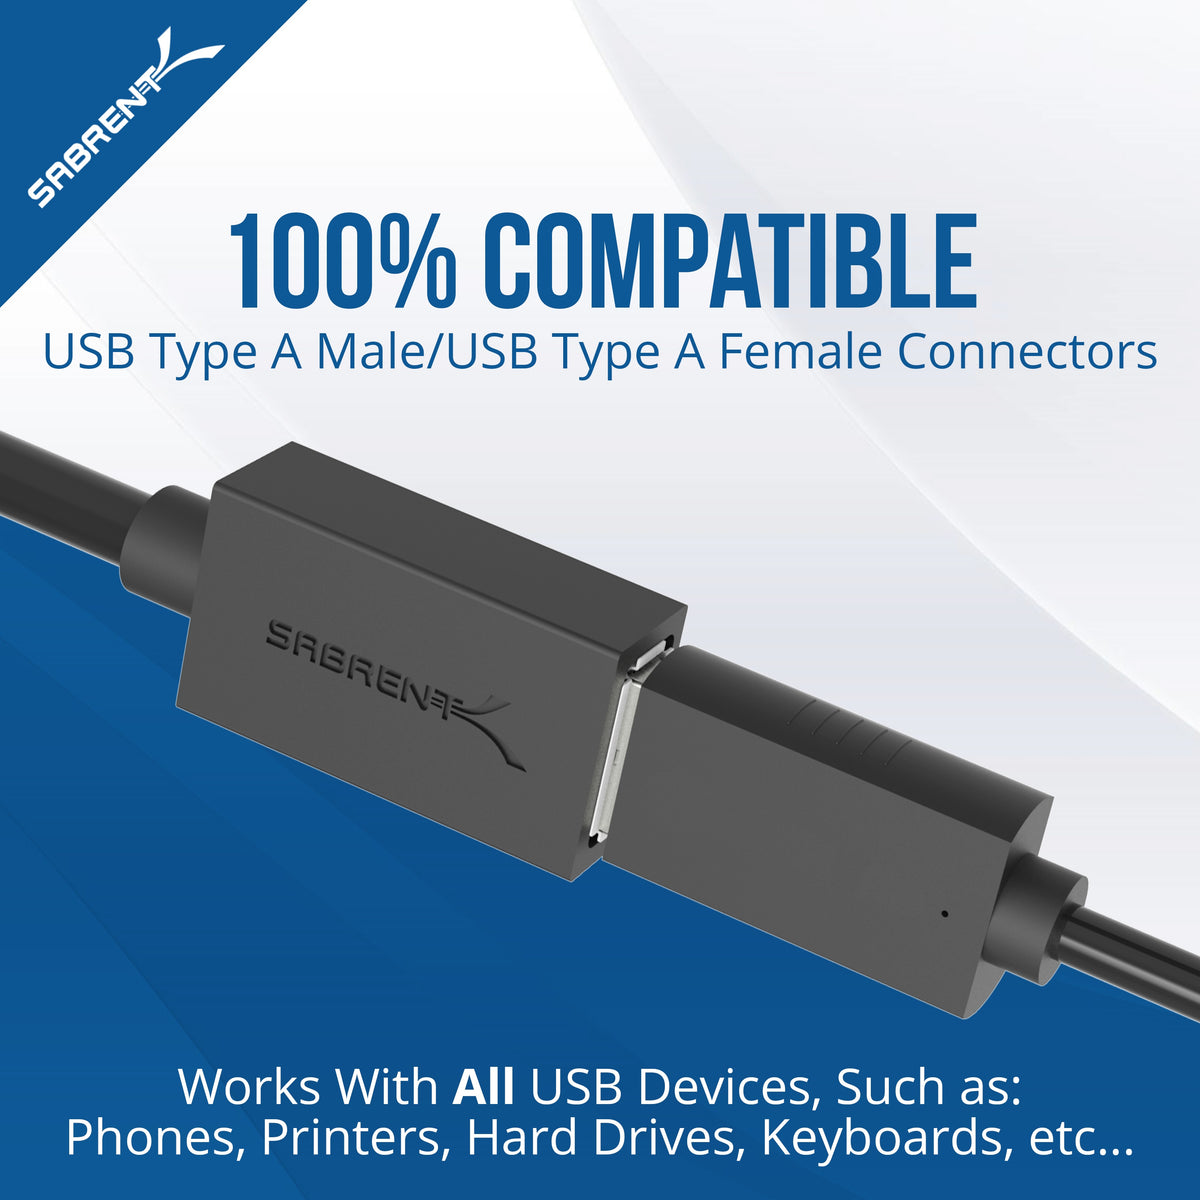 22AWG USB 3.0 Extension Cable - A-Male to A-Female [Black] 6 Feet